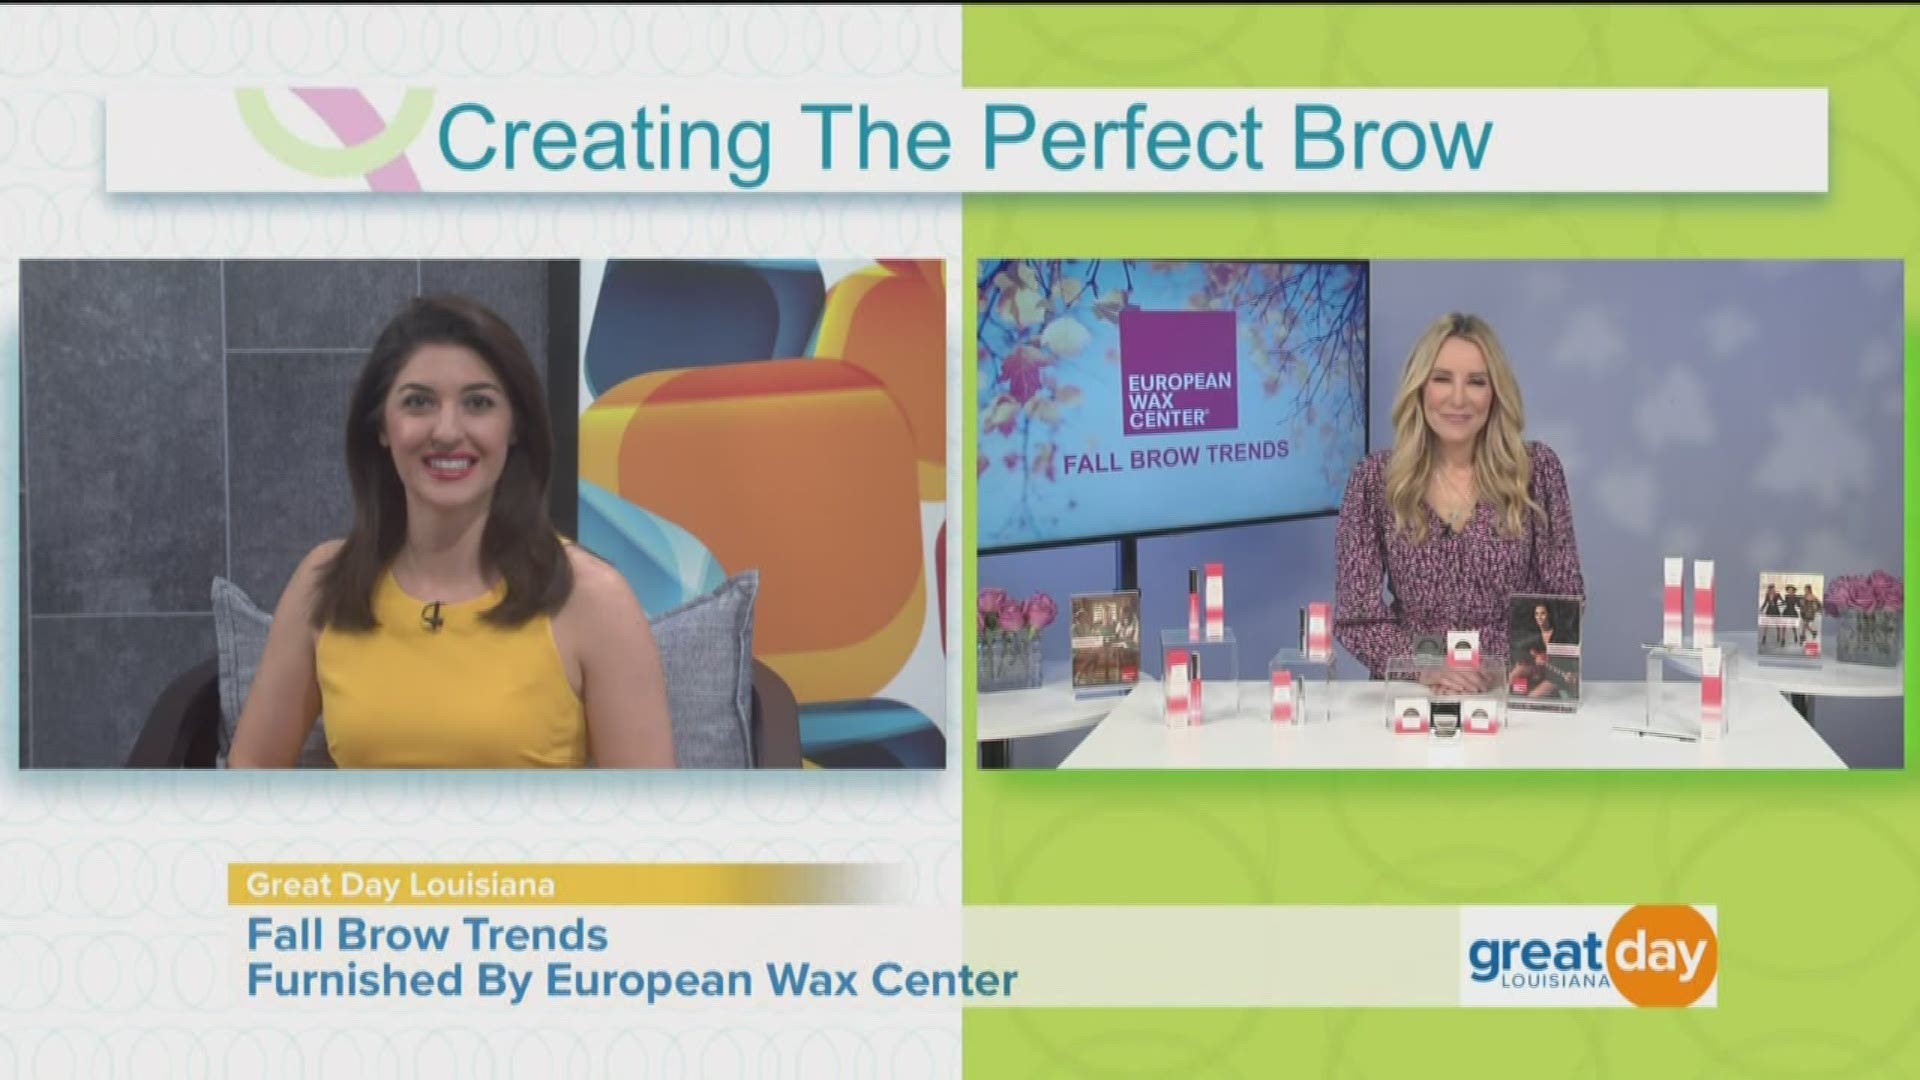 Learn why eyebrows are so important for a beautiful look this fall and how to create the perfect brow. For more information, visit WaxCenter.com.